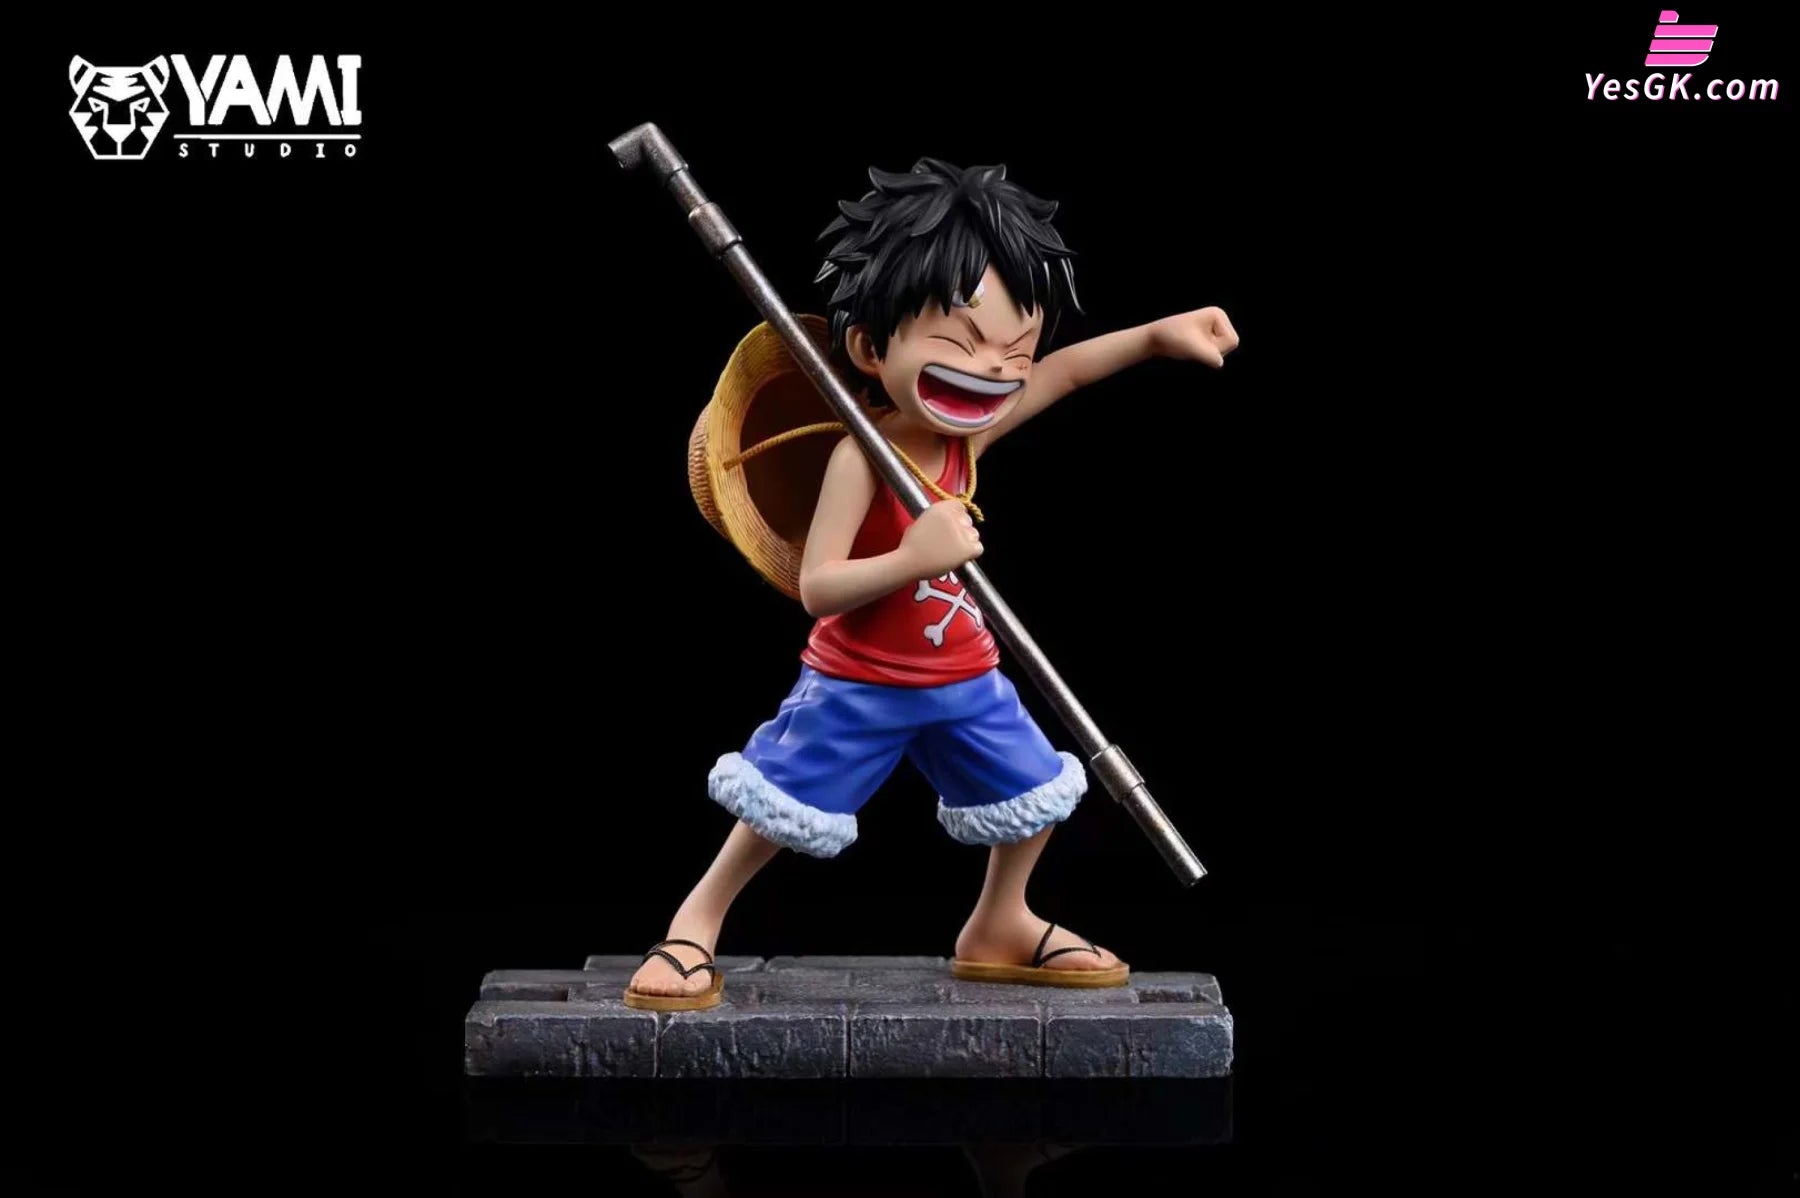  LIANGLIDE One Piece Anime Figure,Monkey D Luffy,Portgas D  Ace,Sabo Brotherhood Figure,One Piece Figure Anime Statues Realistic  Character Model Toy : Toys & Games